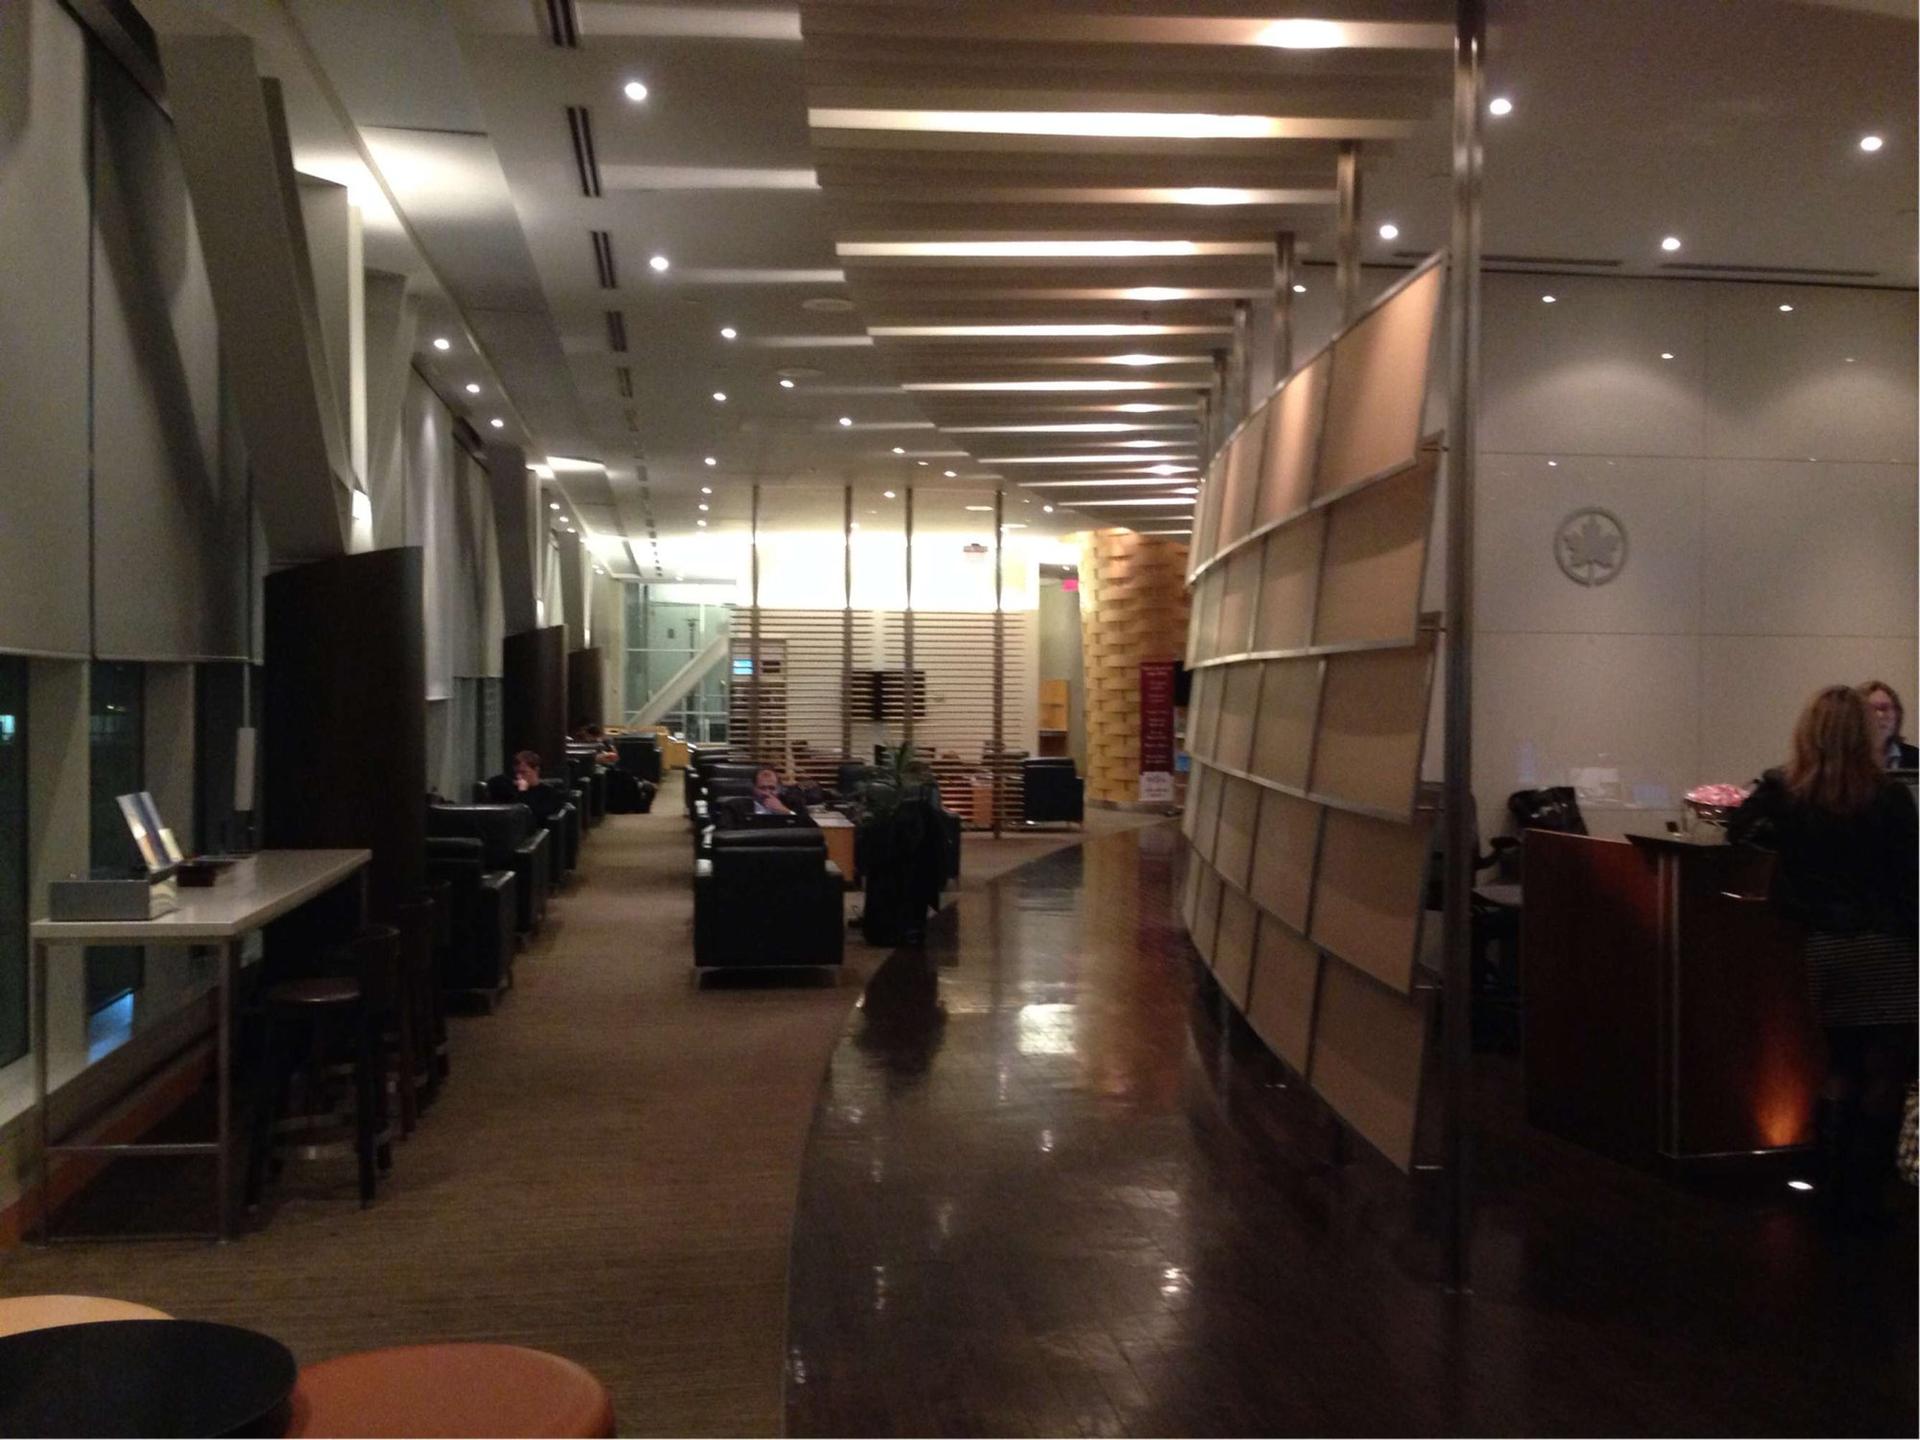 Air Canada Maple Leaf Lounge image 13 of 17